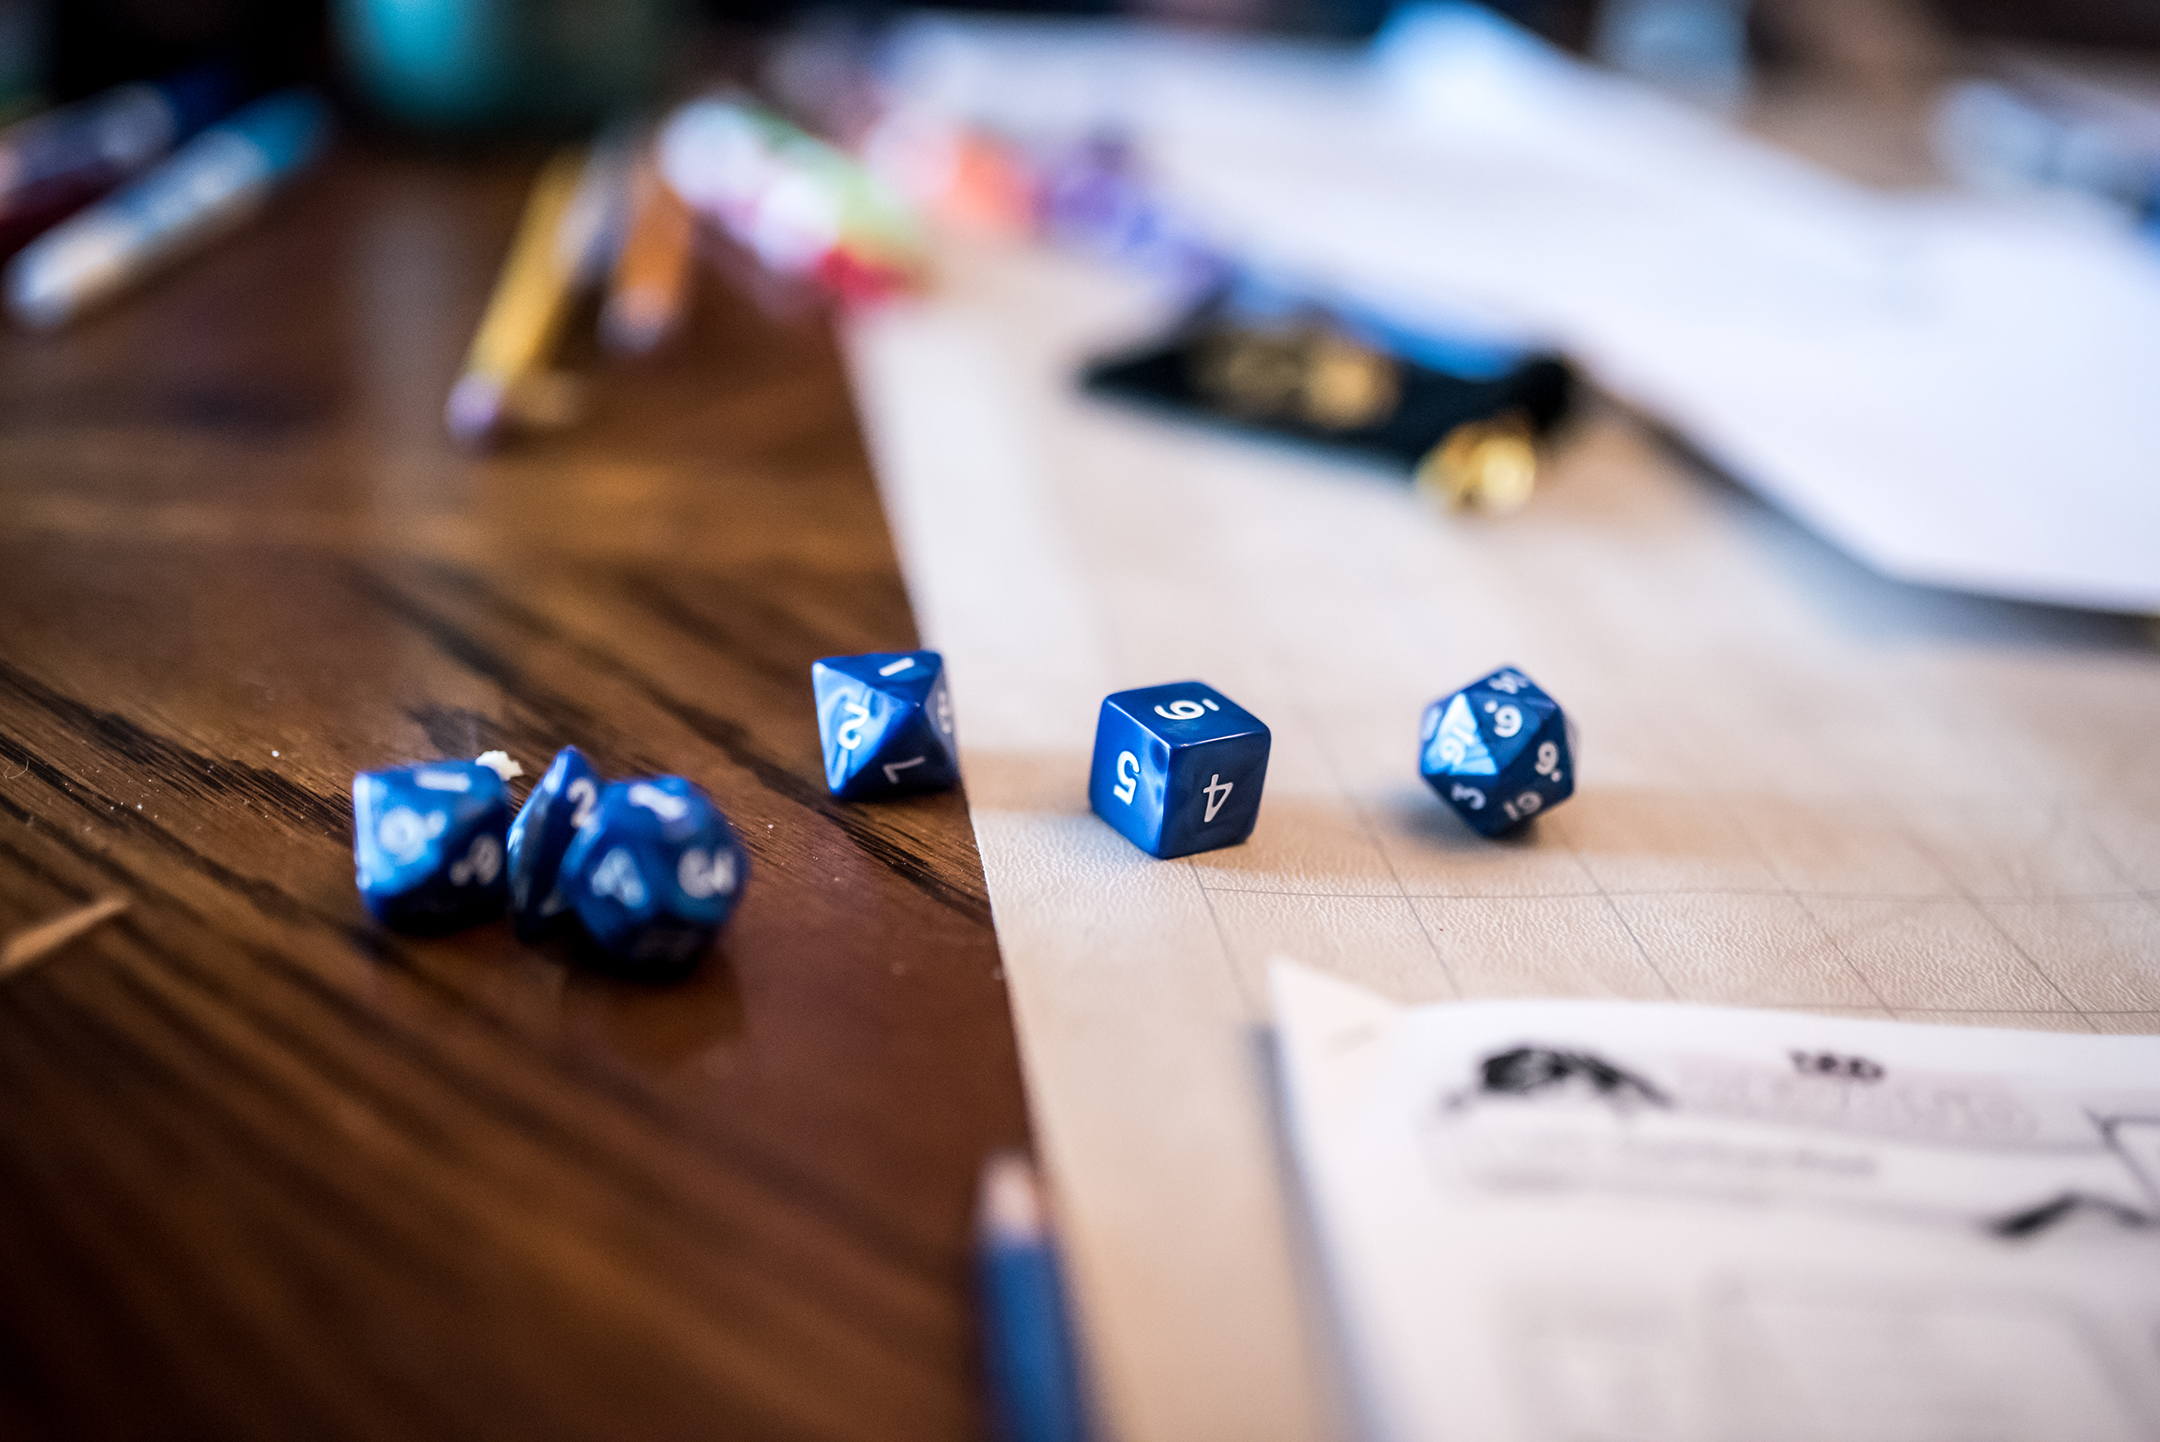 Tabletop with dice, pencils, papers and other tools for a role playing game of dungeons and dragons in progress